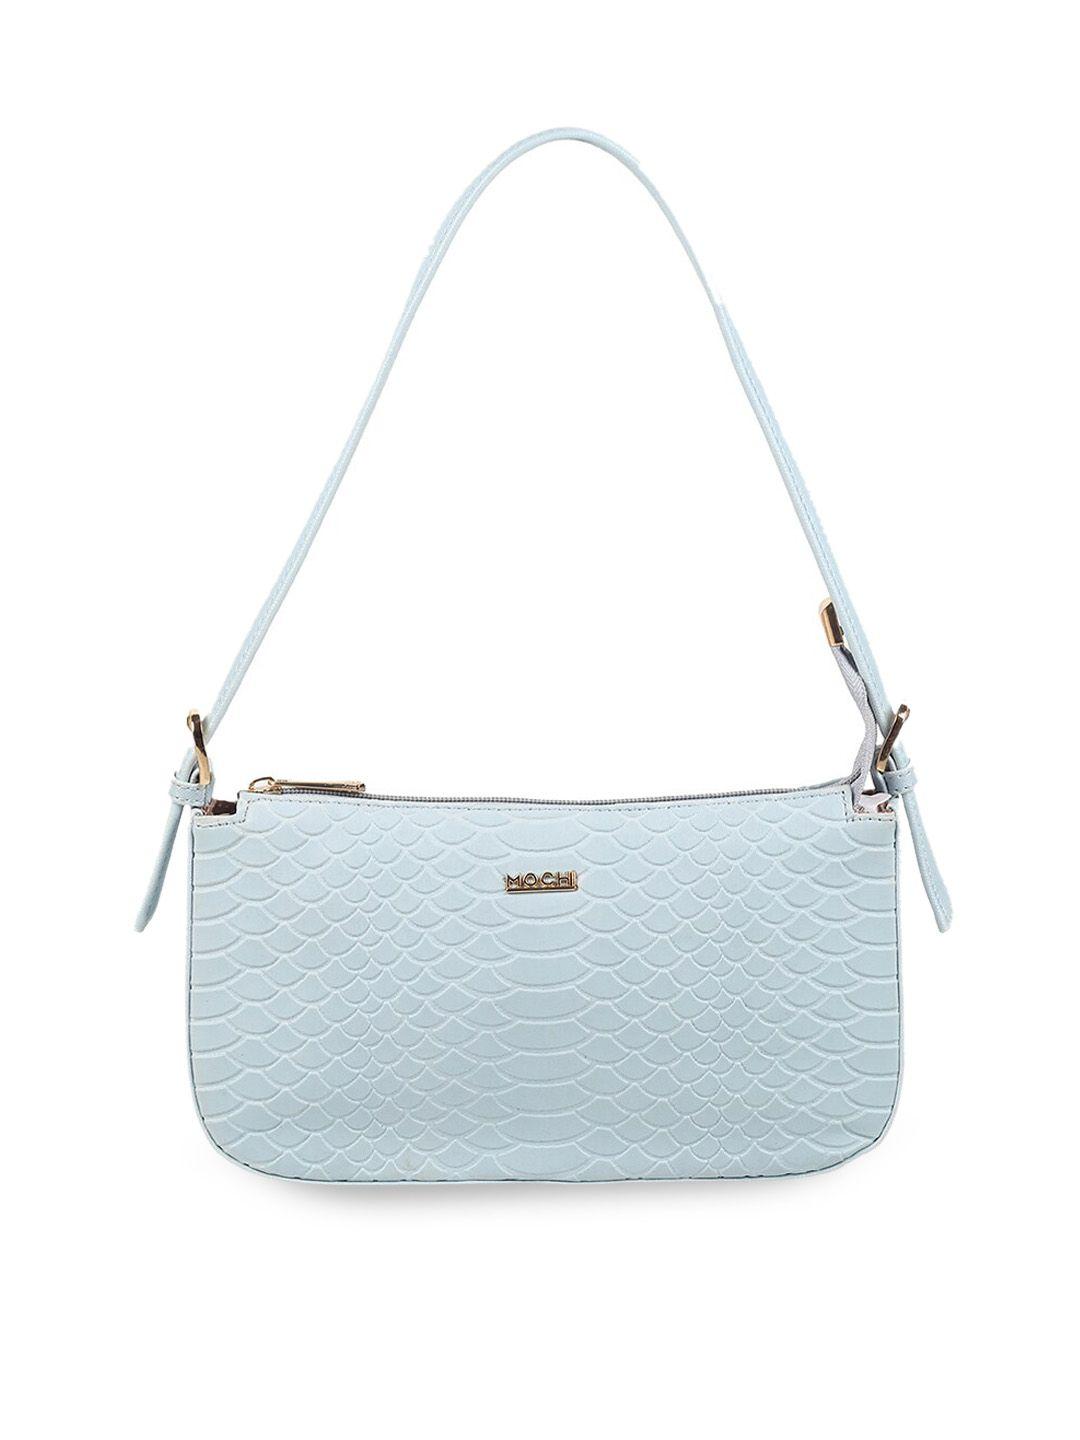 mochi-blue-textured-swagger-hobo-bag